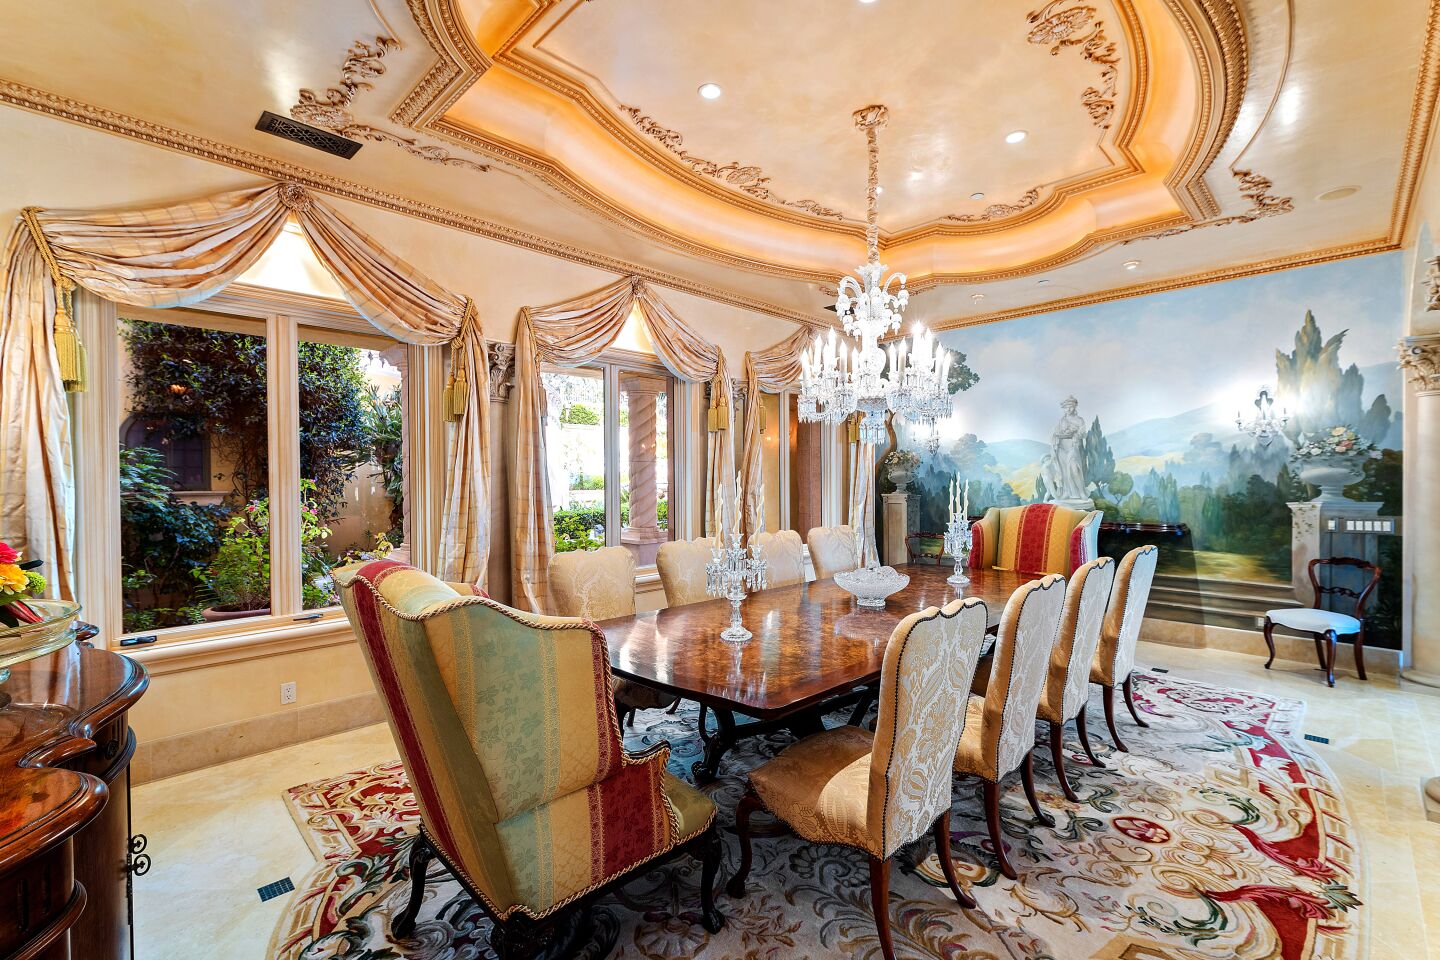 A sculpted ceiling, chandelier and mural of a bucolic scene in the dining room.